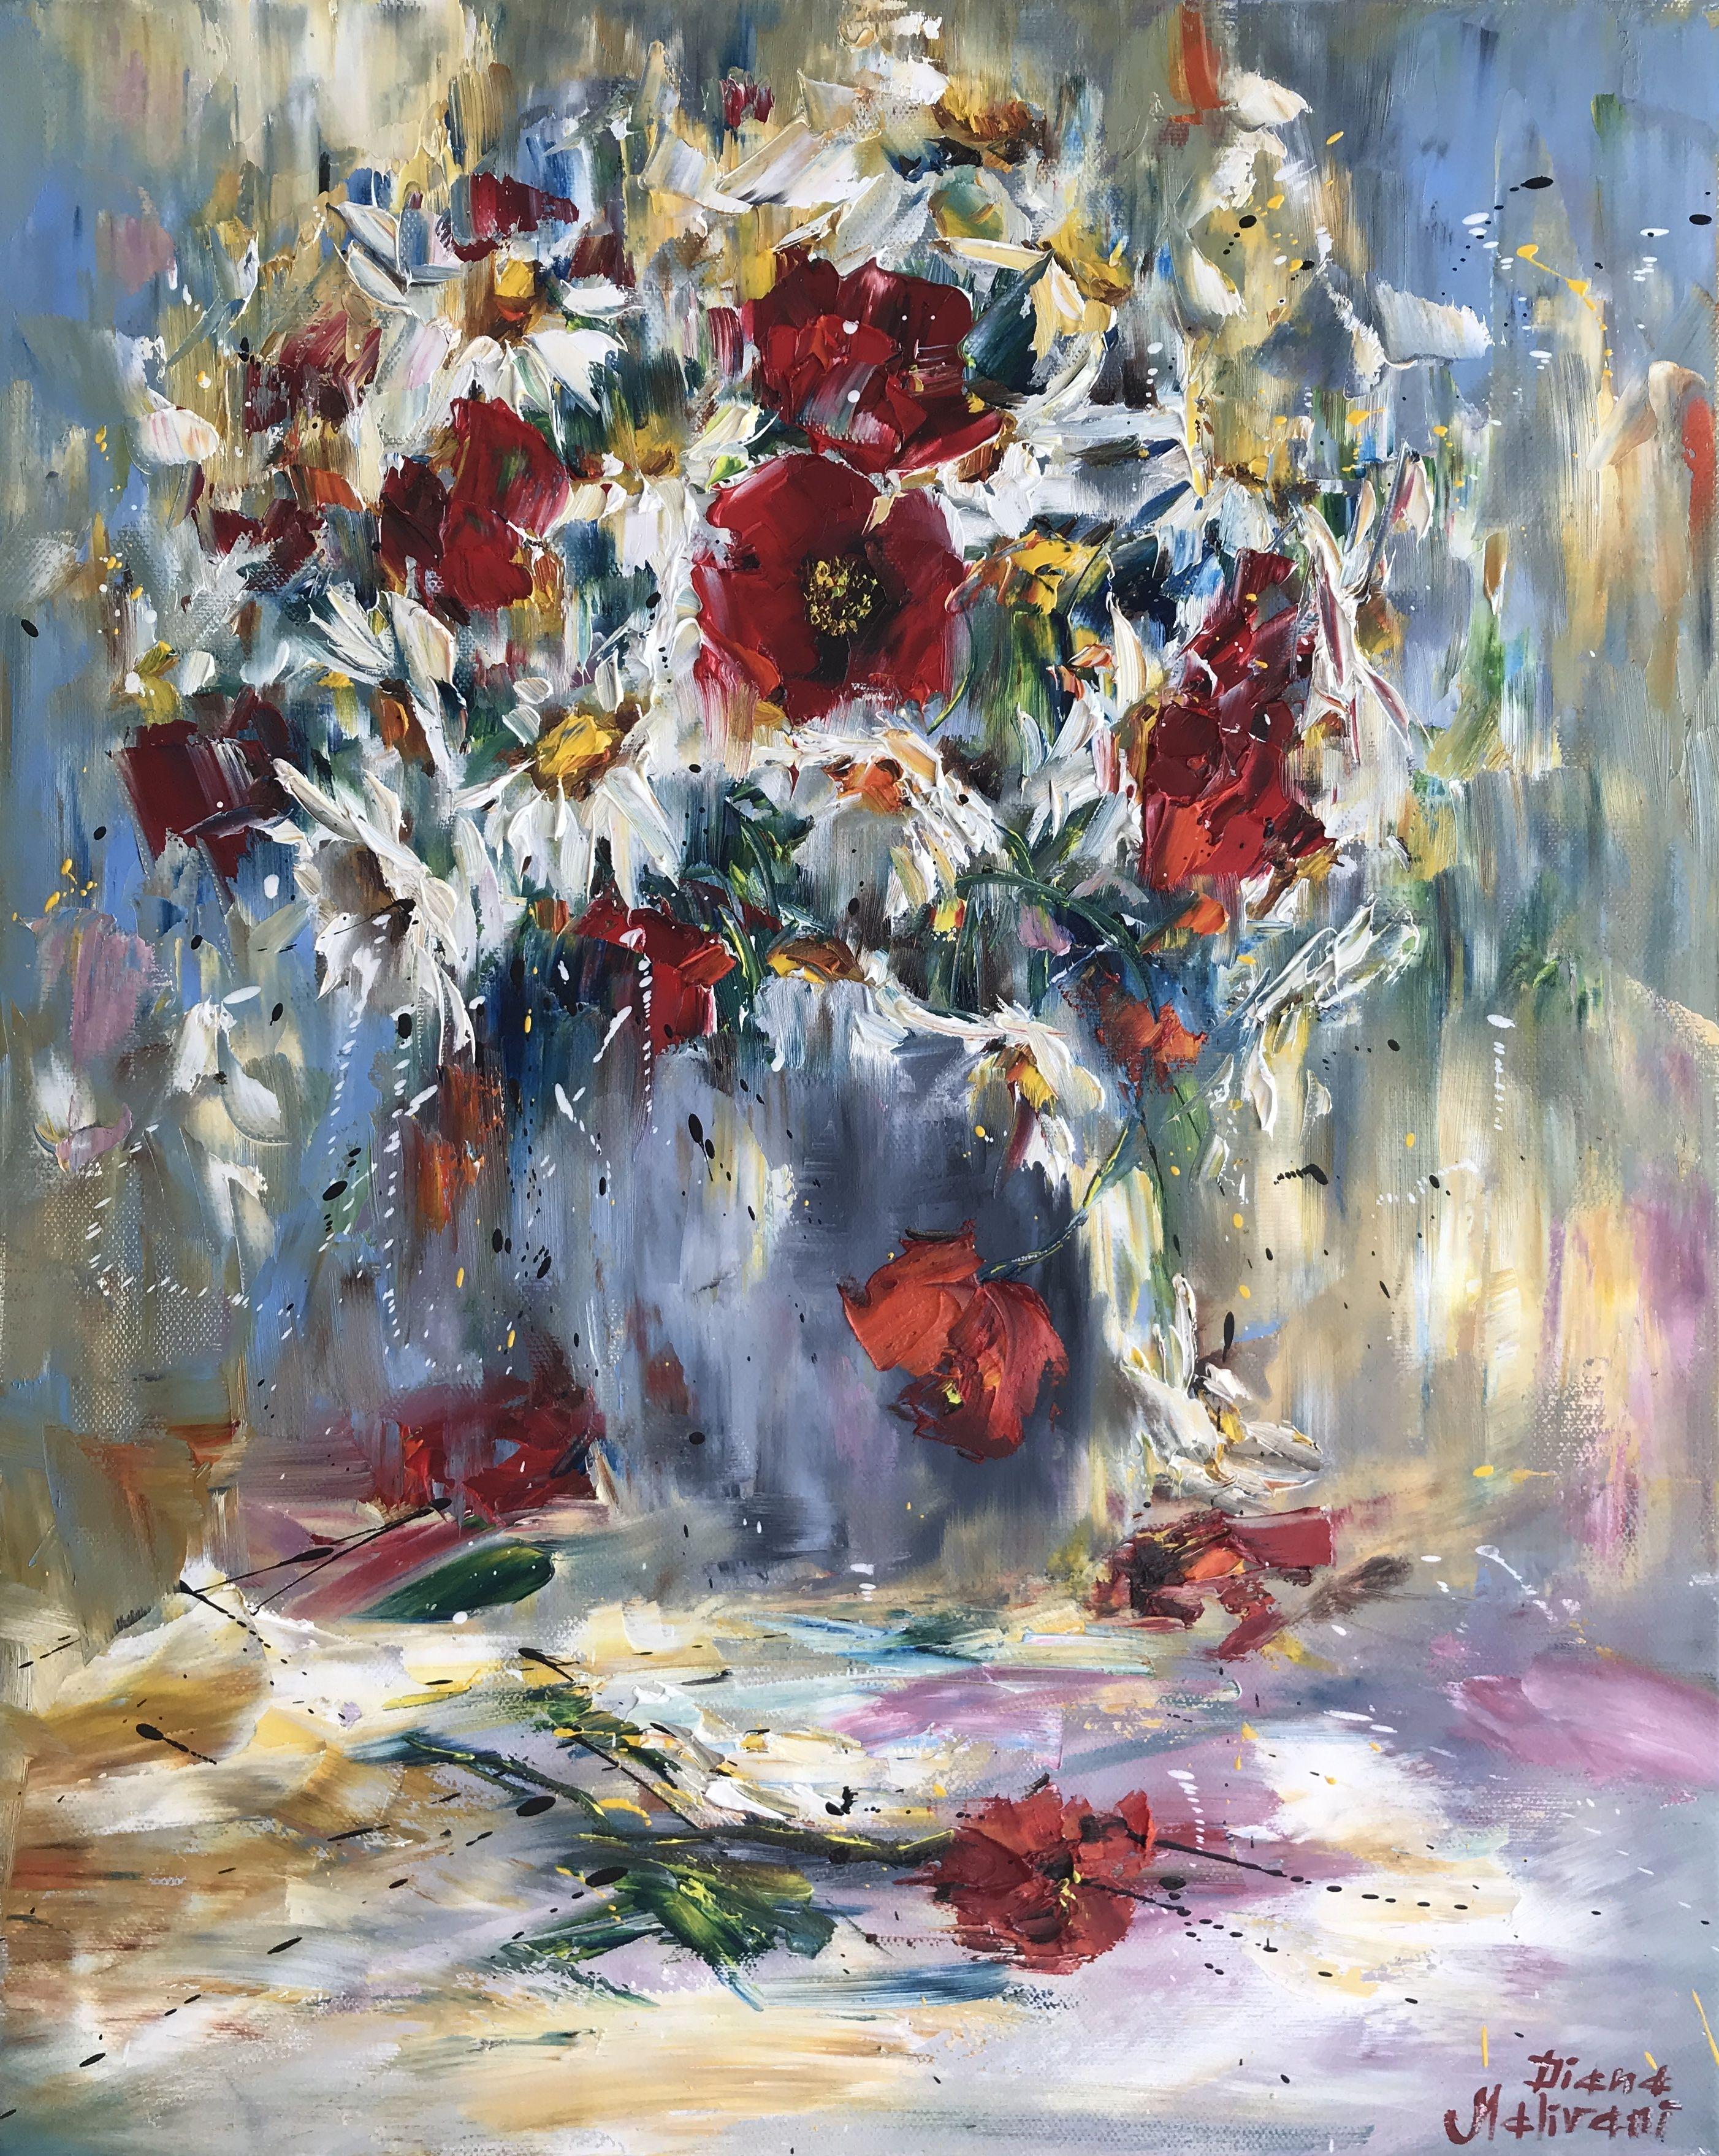 Collection Â«Flowers, Trees, and GardensÂ» * * * This artwork was specially selected to be exhibited in three National Fine Art Museums in Russia (in the cities of Sotchi, Belgorod, and Saransk) in 2020, as part of Diana Malivani Solo Exhibition